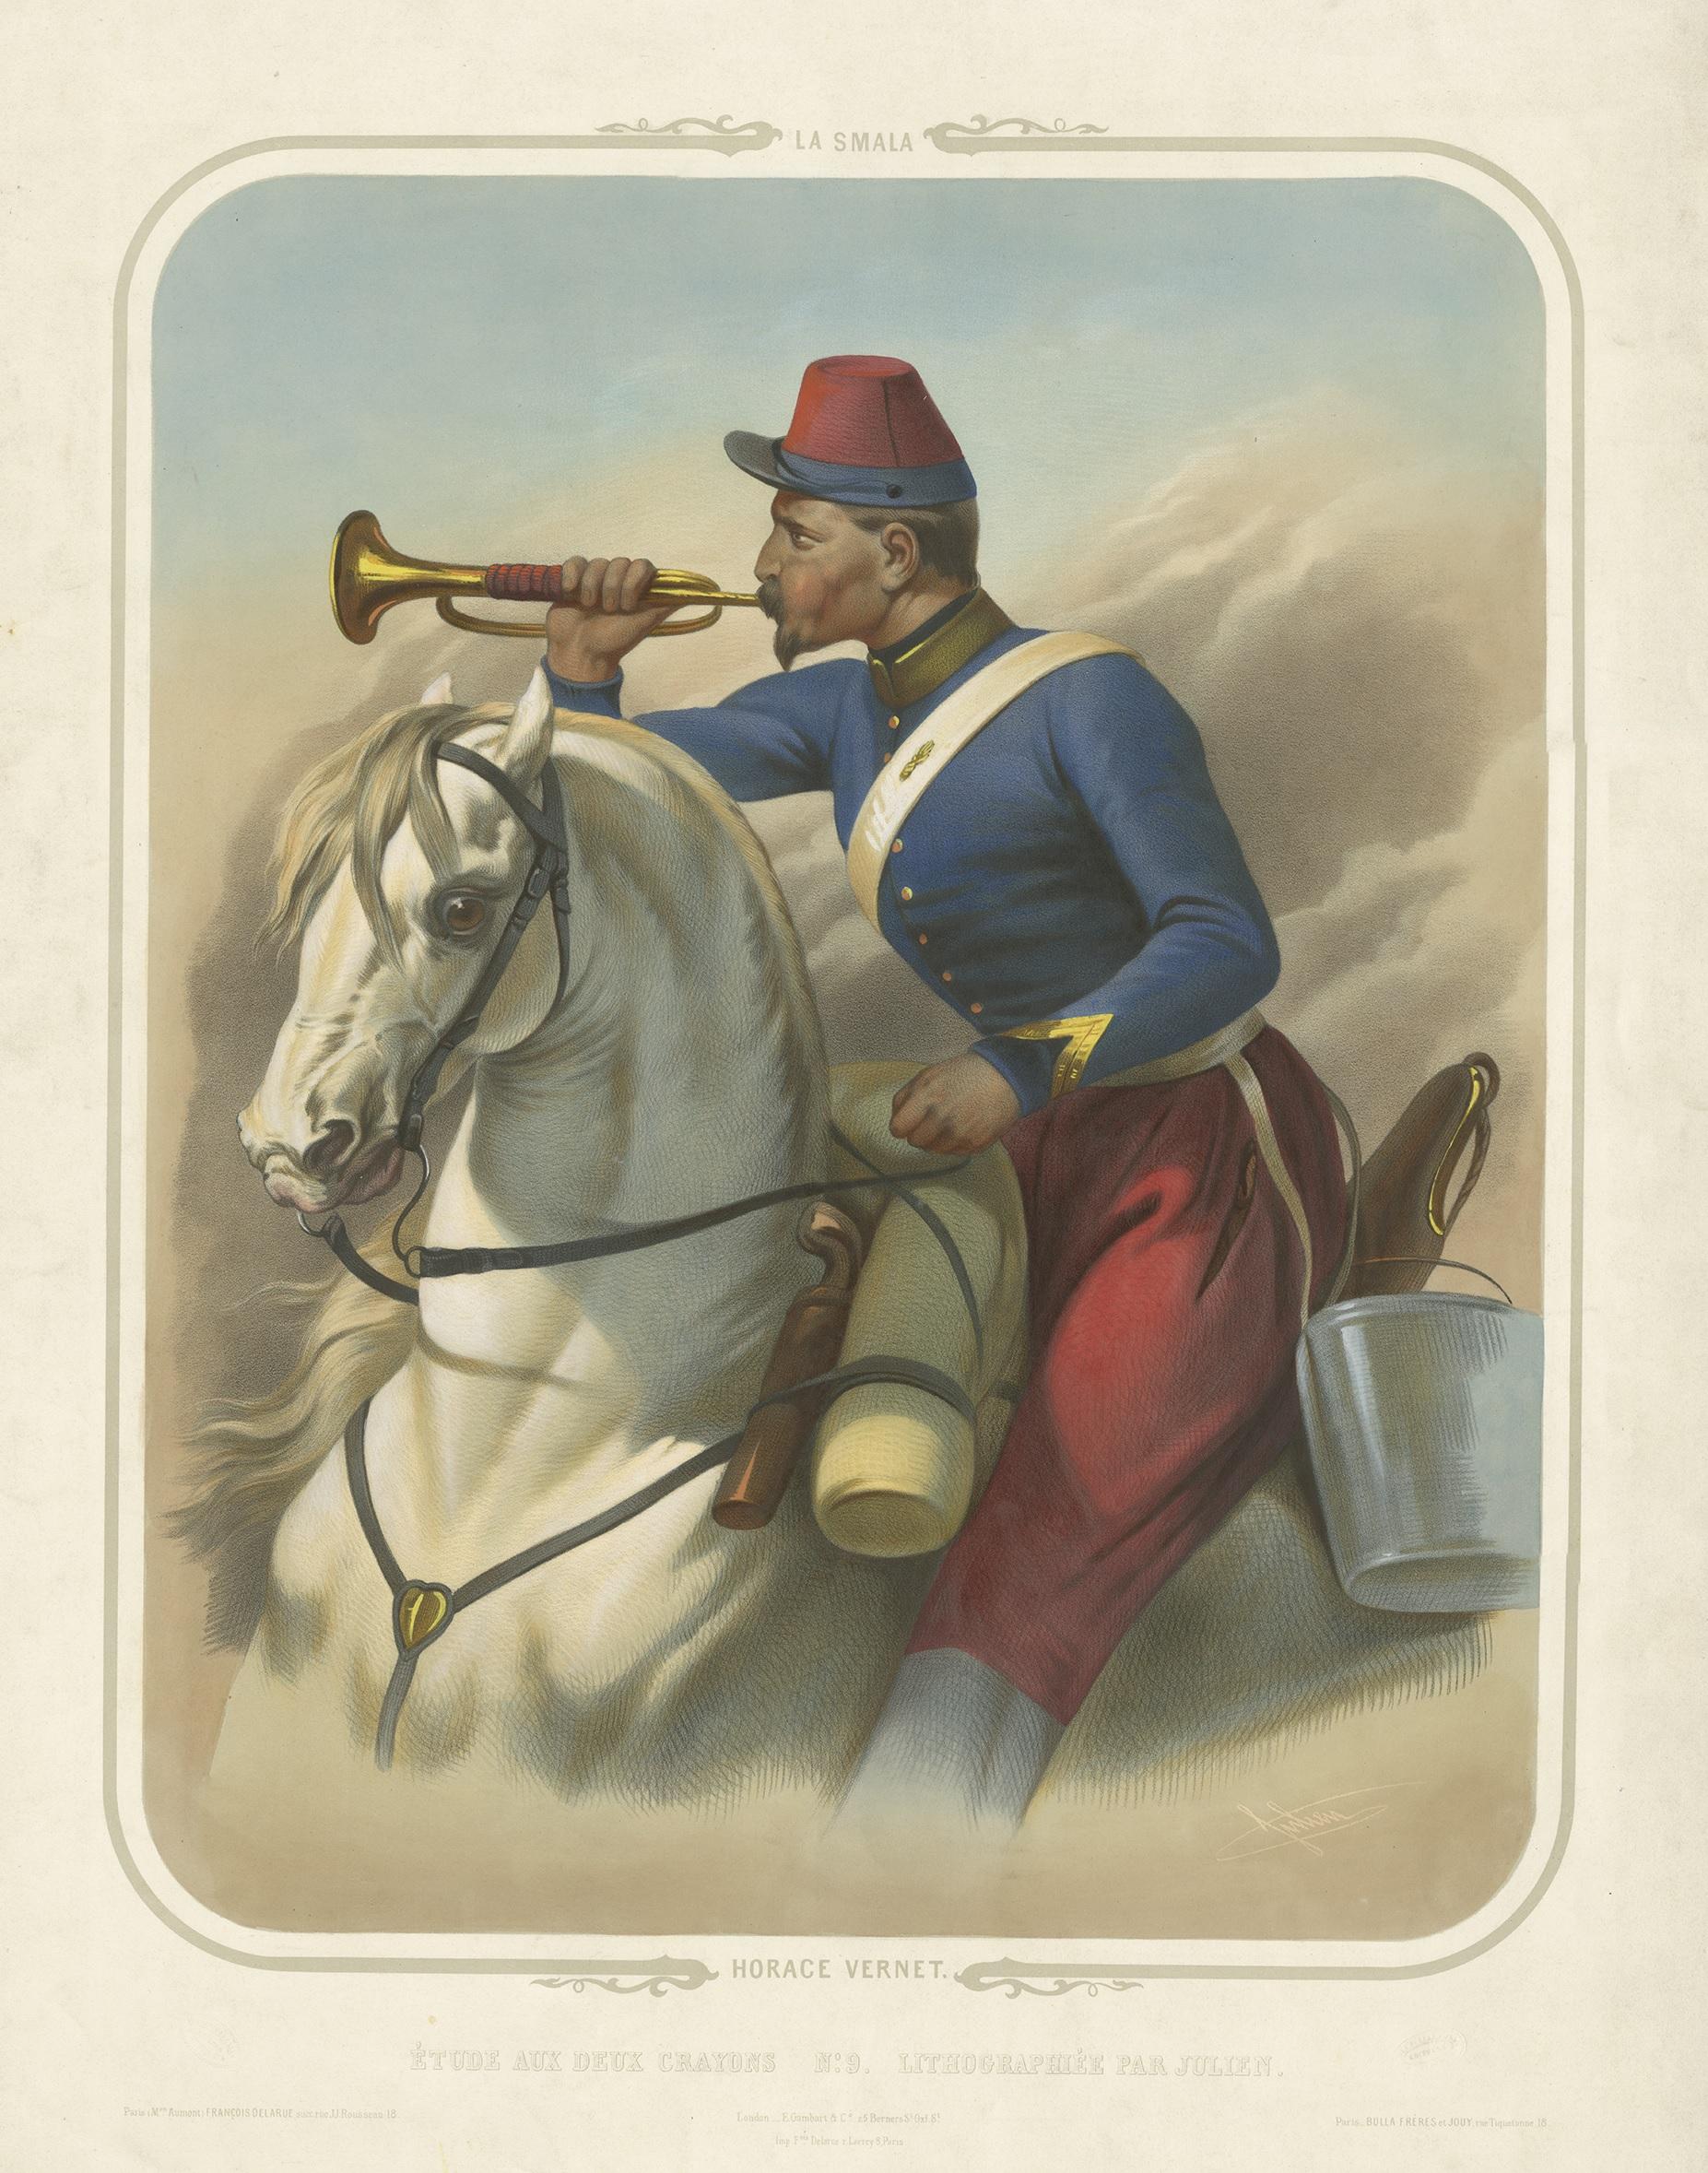 Antique print titled 'La Smala - Étude aux deux Crayons No. 9 Lithographiée par Julien'. Large lithograph of a French cavalryman with trumpet. Originates from a series illustrating the Battle of the Smala, fought in 1843 between France and Algerian